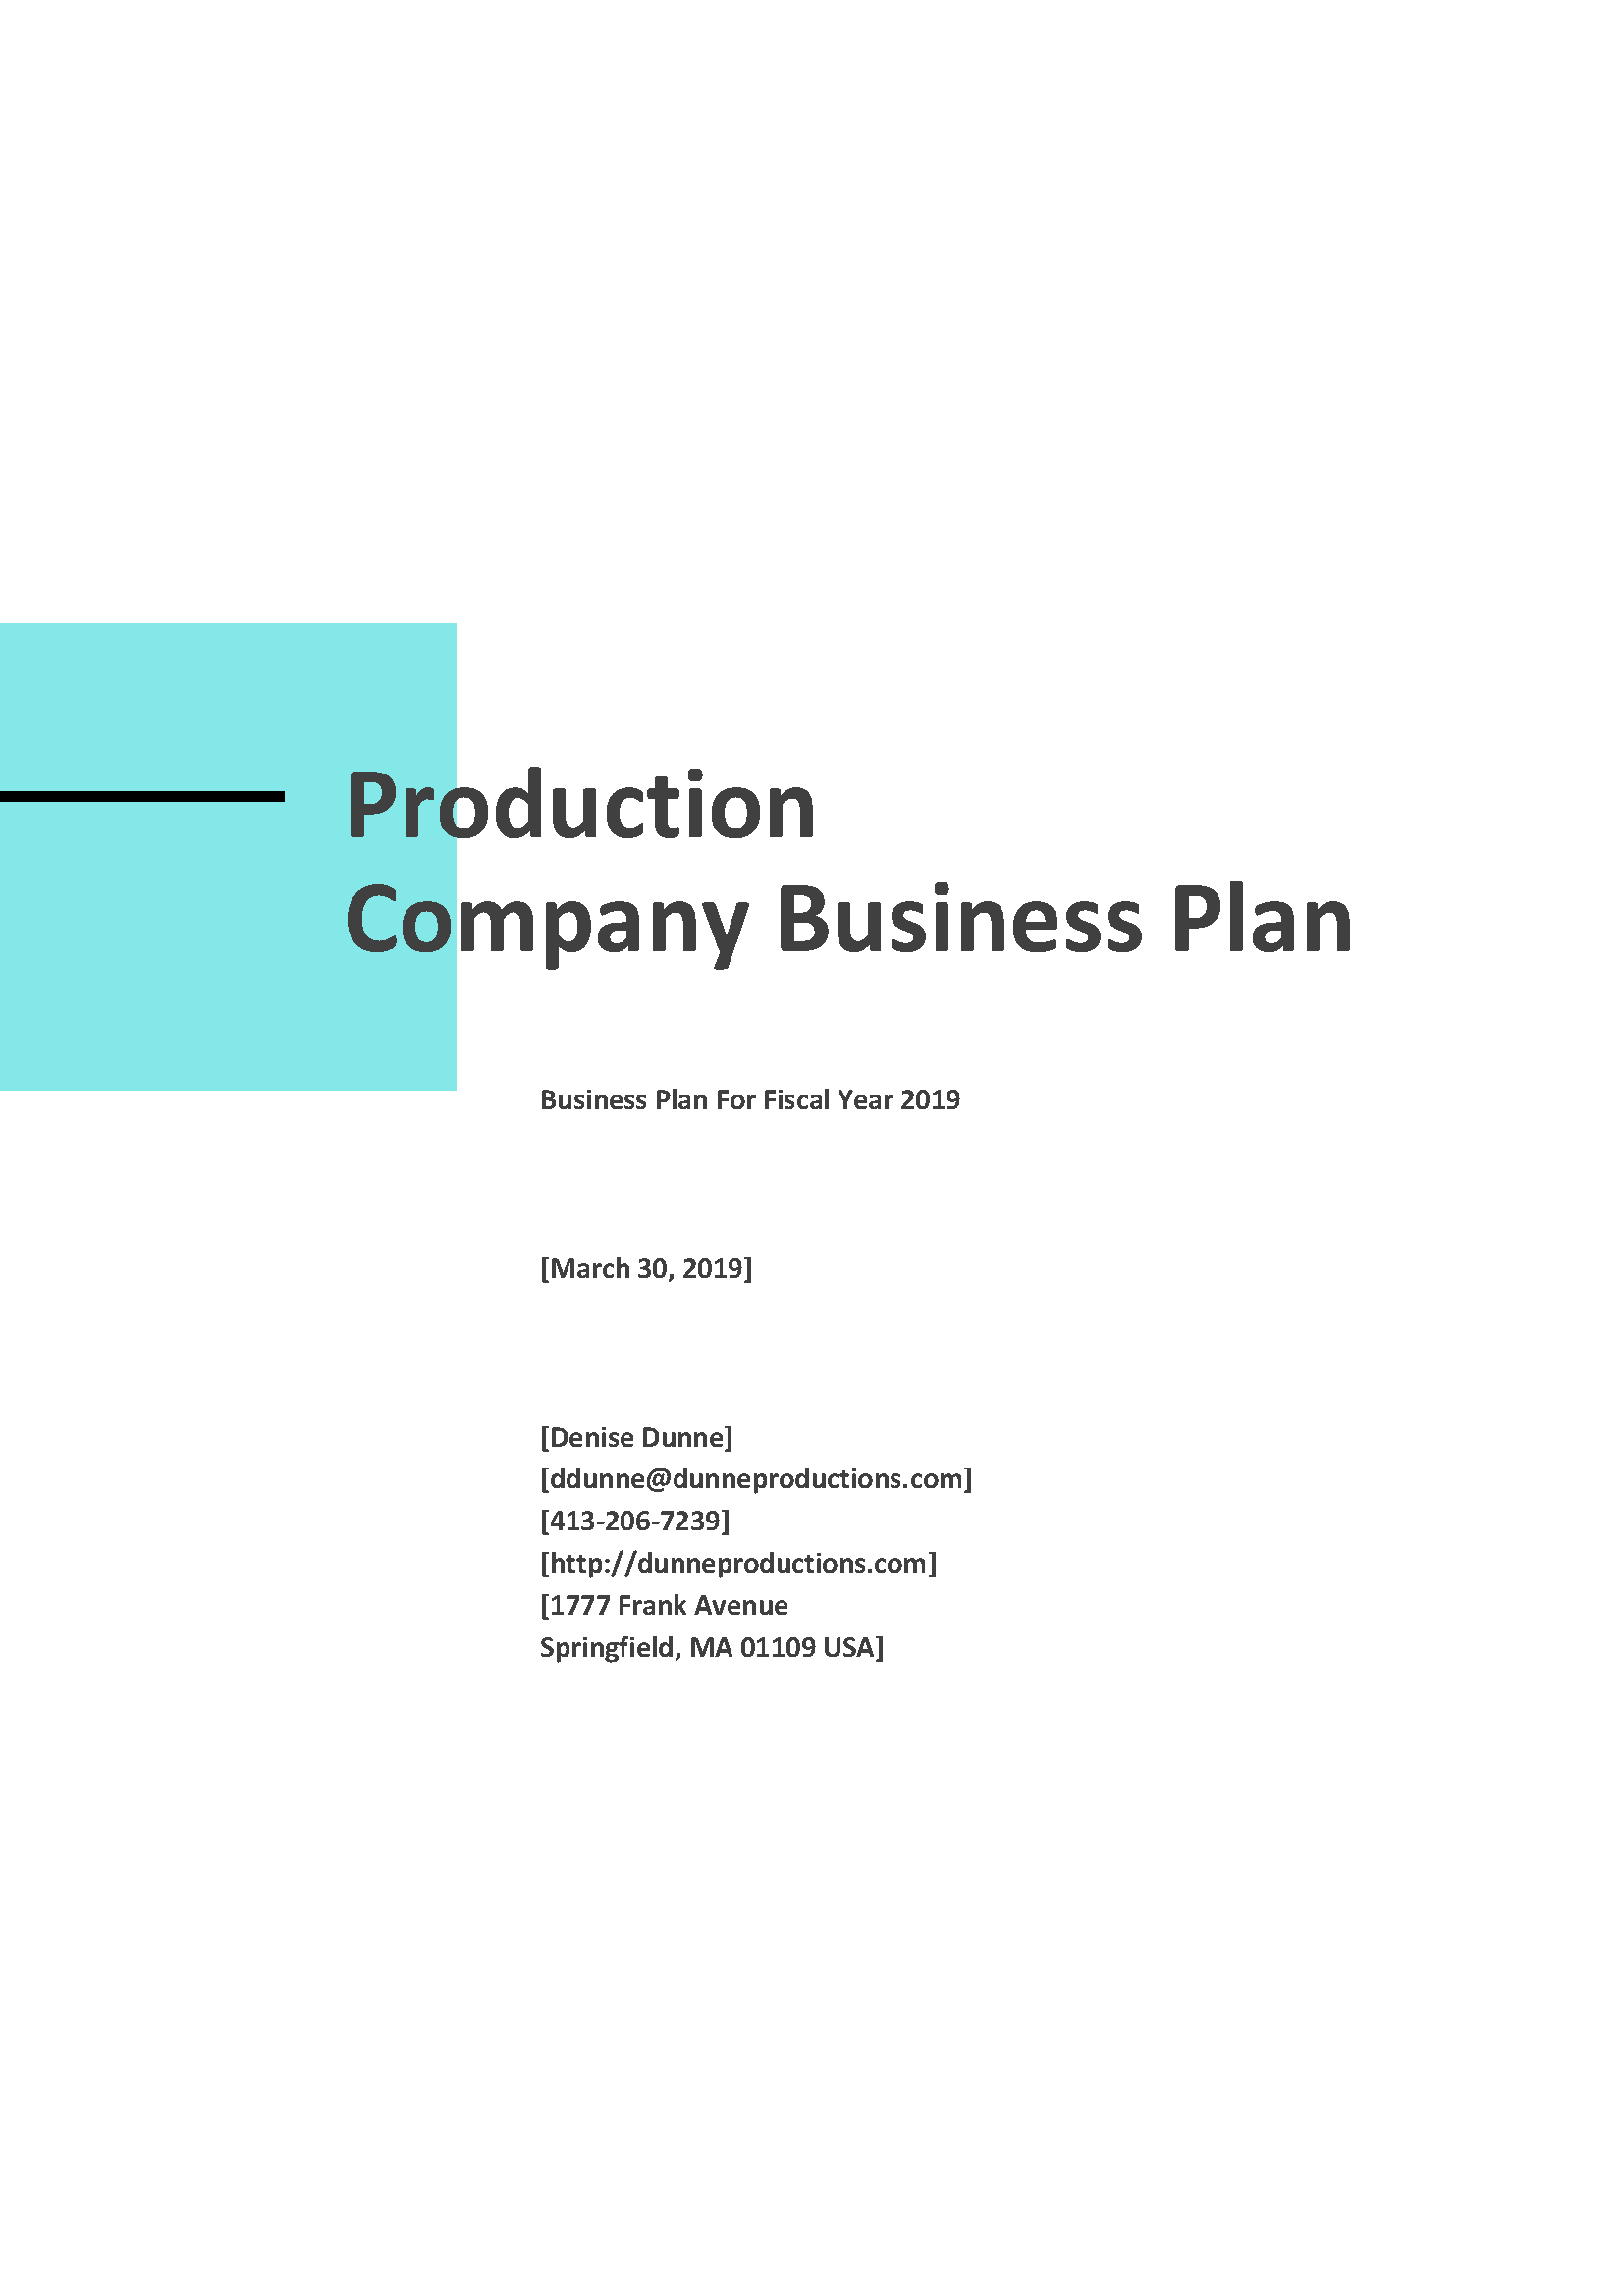 8 - Production Company Business Plan